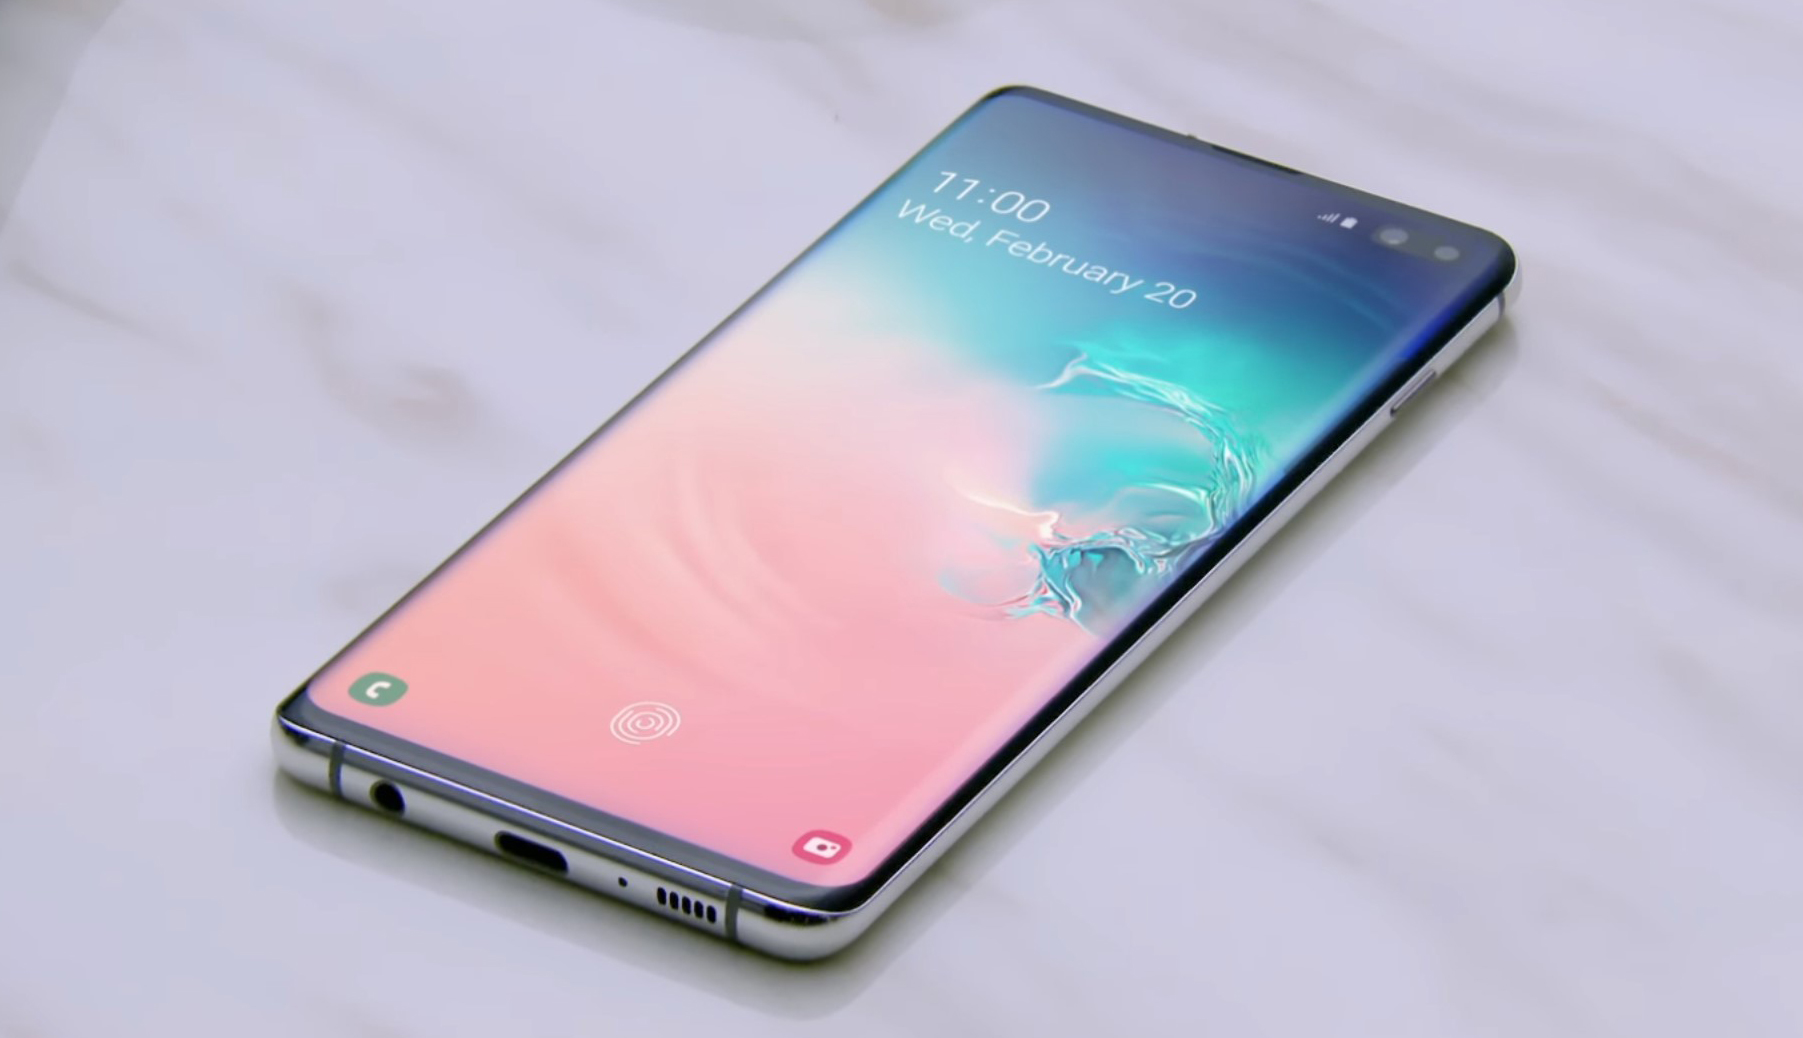 Samsung Galaxy S10 Plus 1tb In White Ceramic And The Price Offered